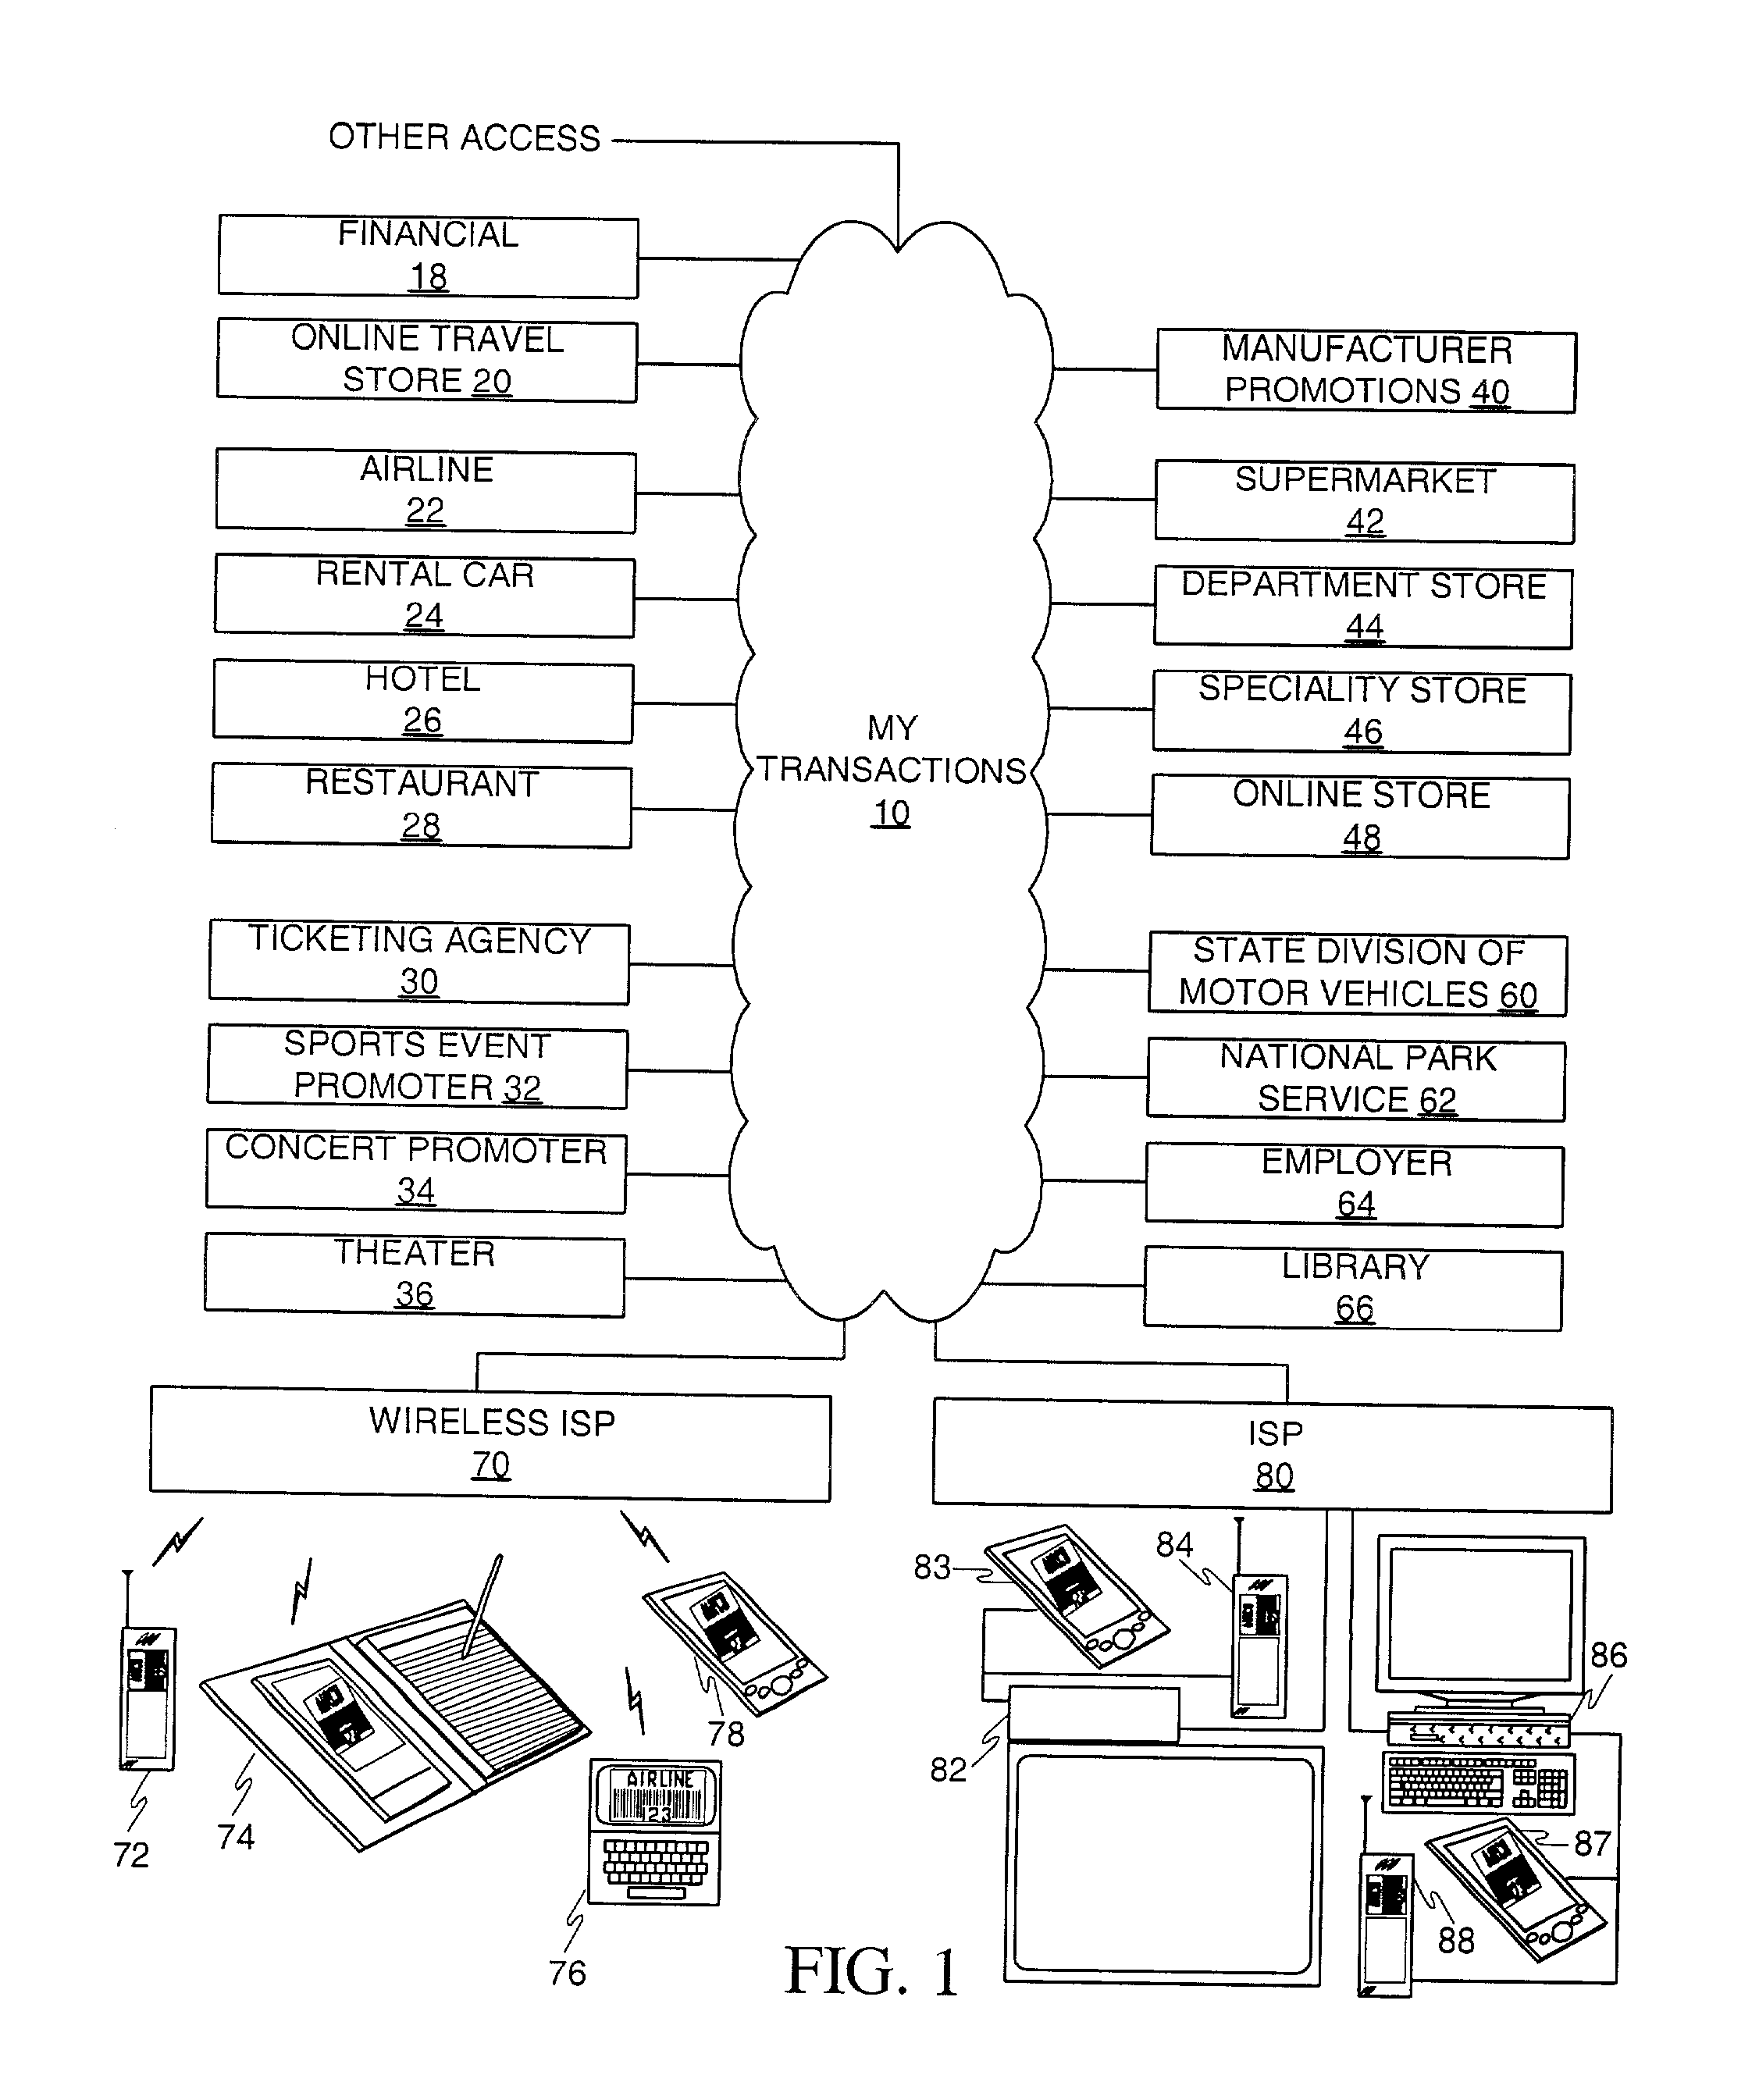 Method and apparatus for acquiring, maintaining, and using information to be communicated in bar code form with a mobile communications device